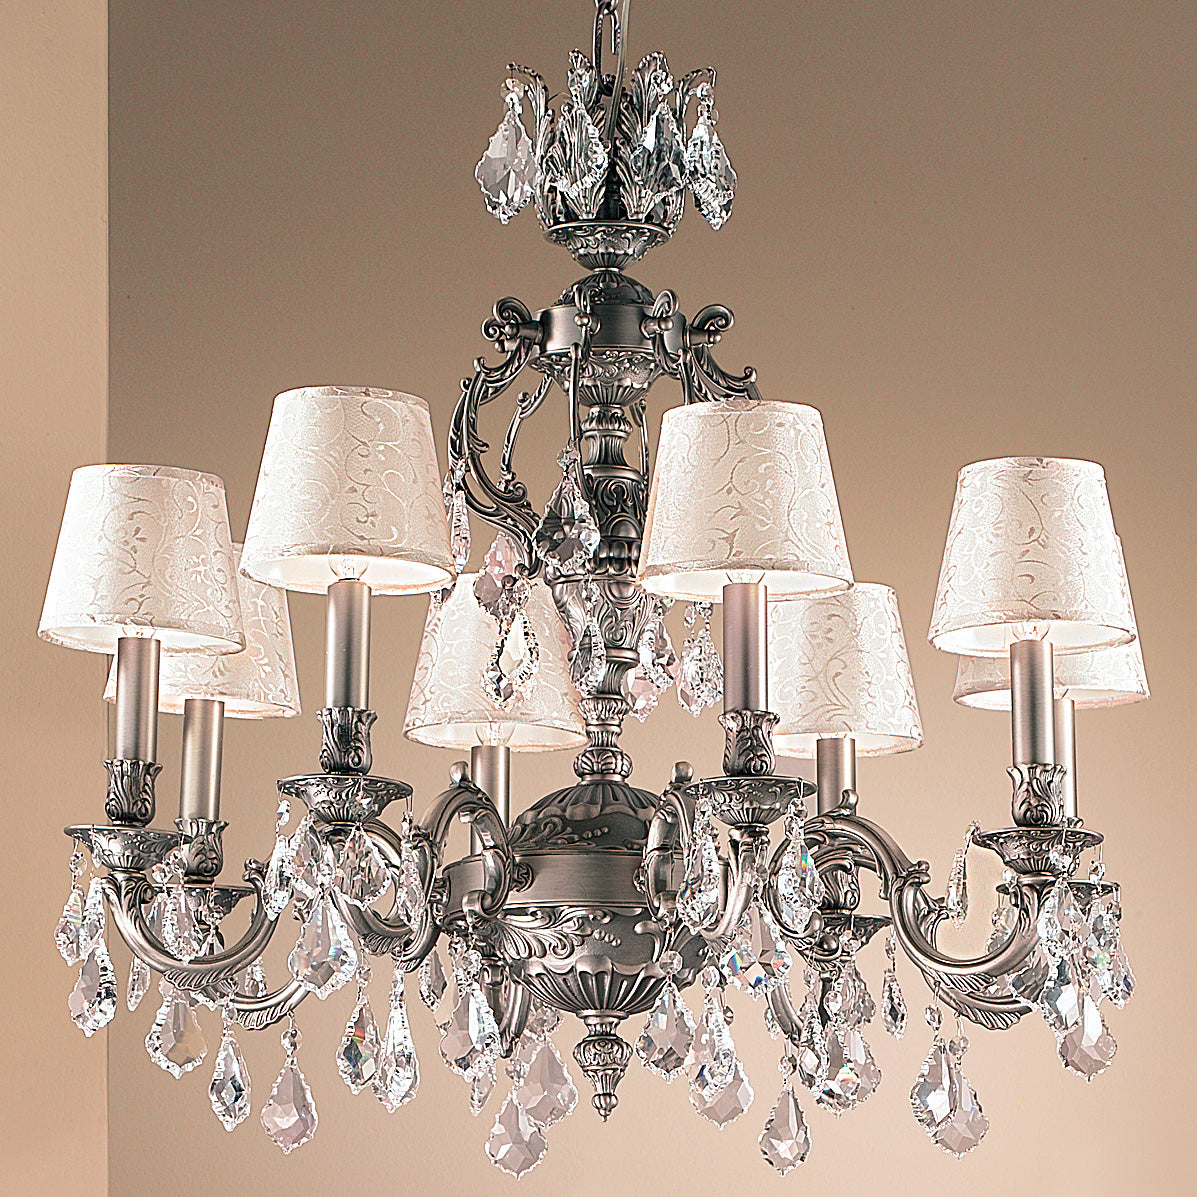 Classic Lighting 57378 FG SGT Chateau Crystal Chandelier in French Gold (Imported from Spain)